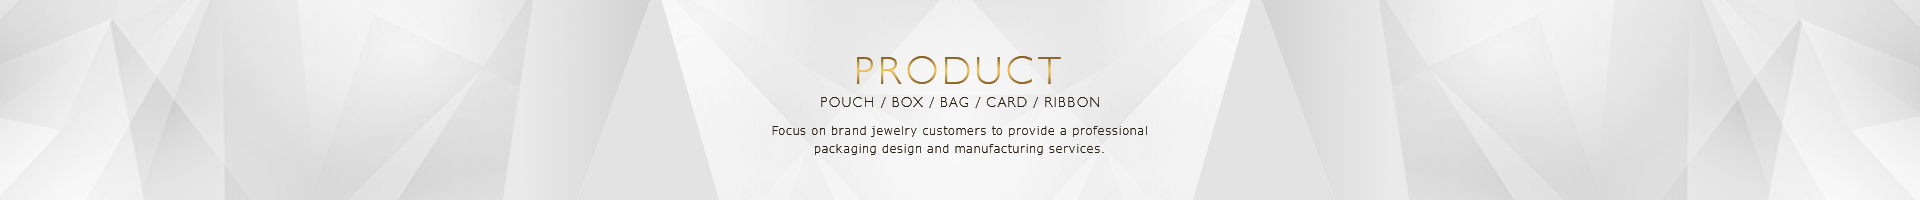 Excellent work luxury custom logo jewelry gift box packaging - Jewelry packaging sets